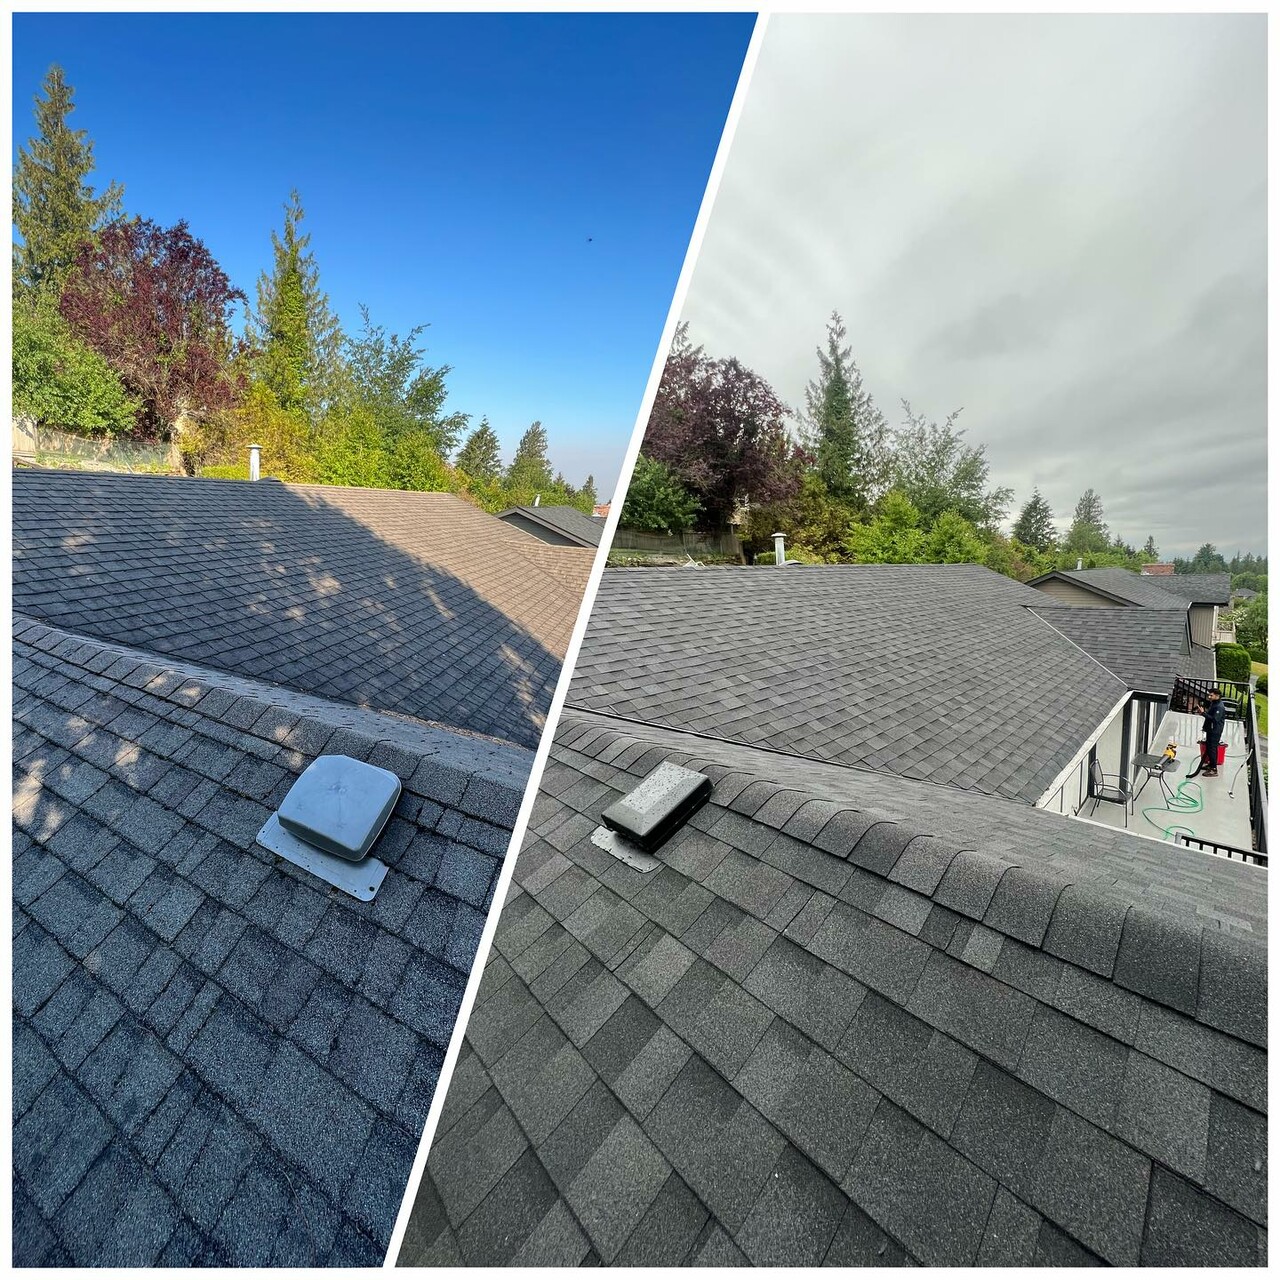 Upgraded residential roofs by AlphaNova Roofing in Lower Mainland, Metro Vancouver, Fraser Valley before and after our services.